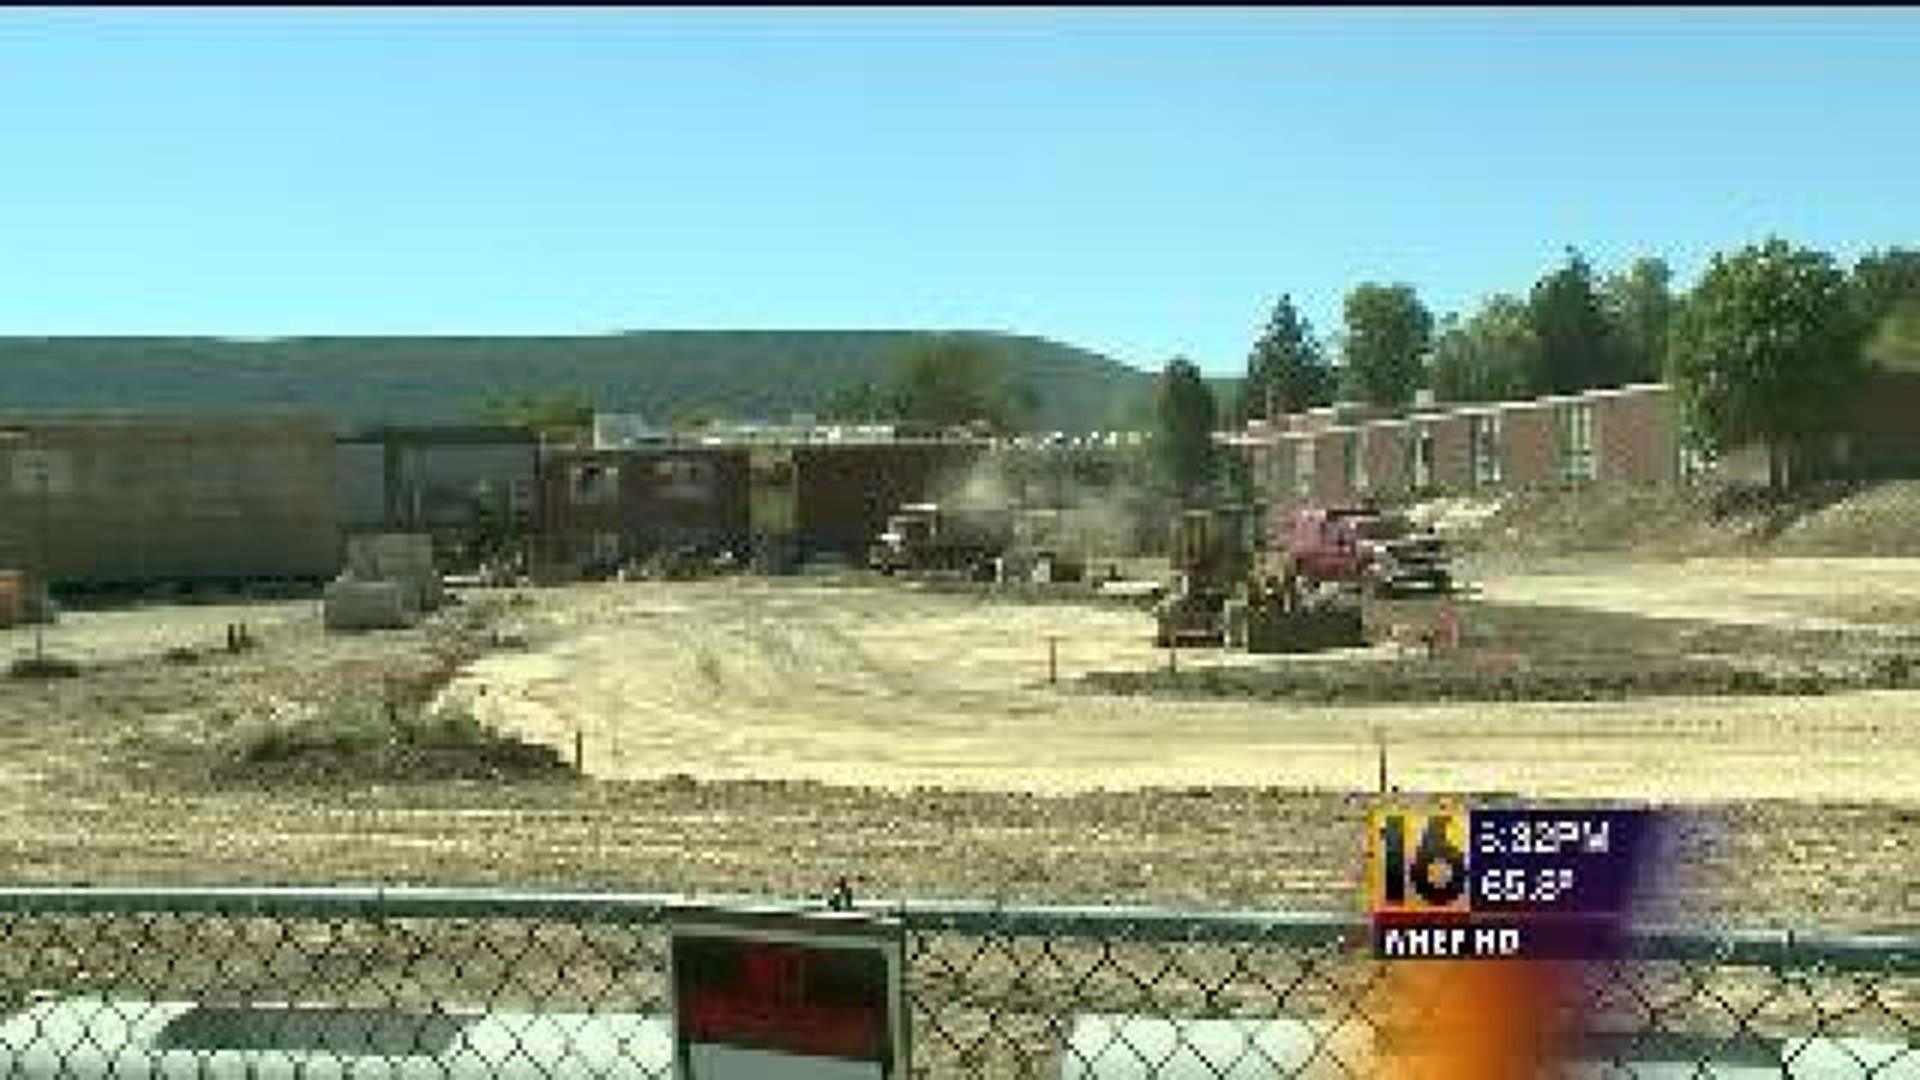 Parents Concerned About Construction at School